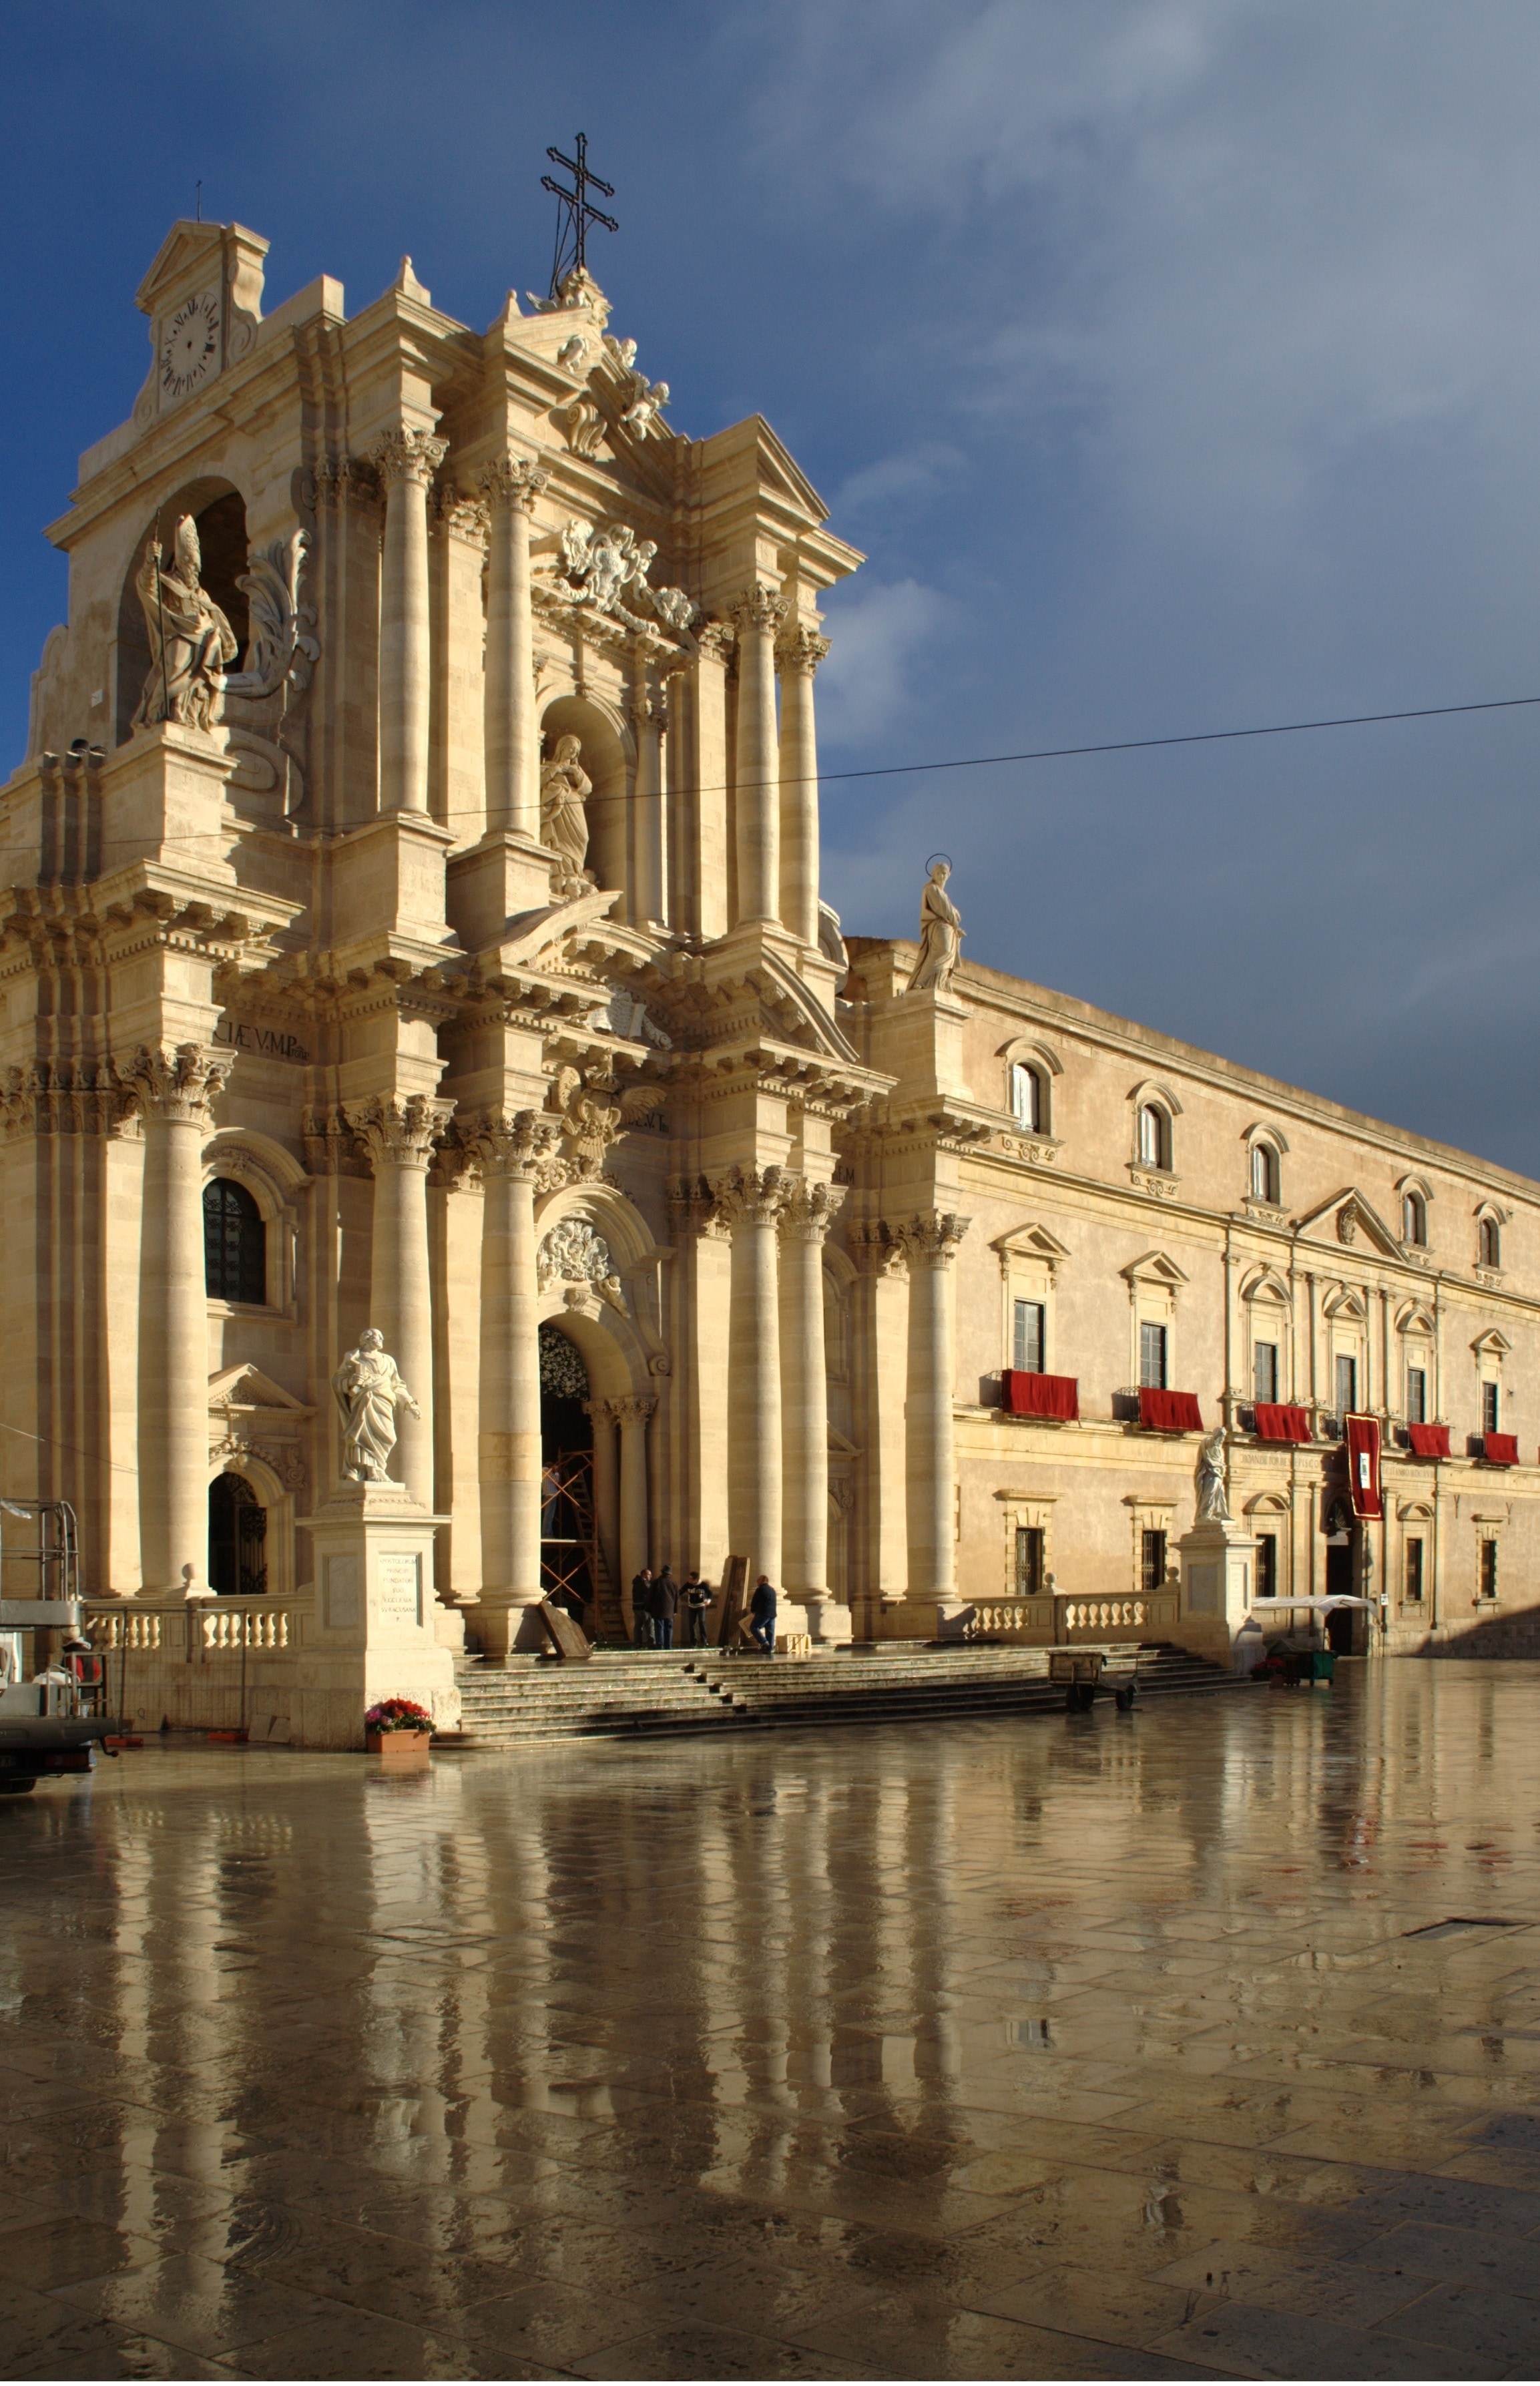 Sicily, Siracusa, Italy, architecture, built structure